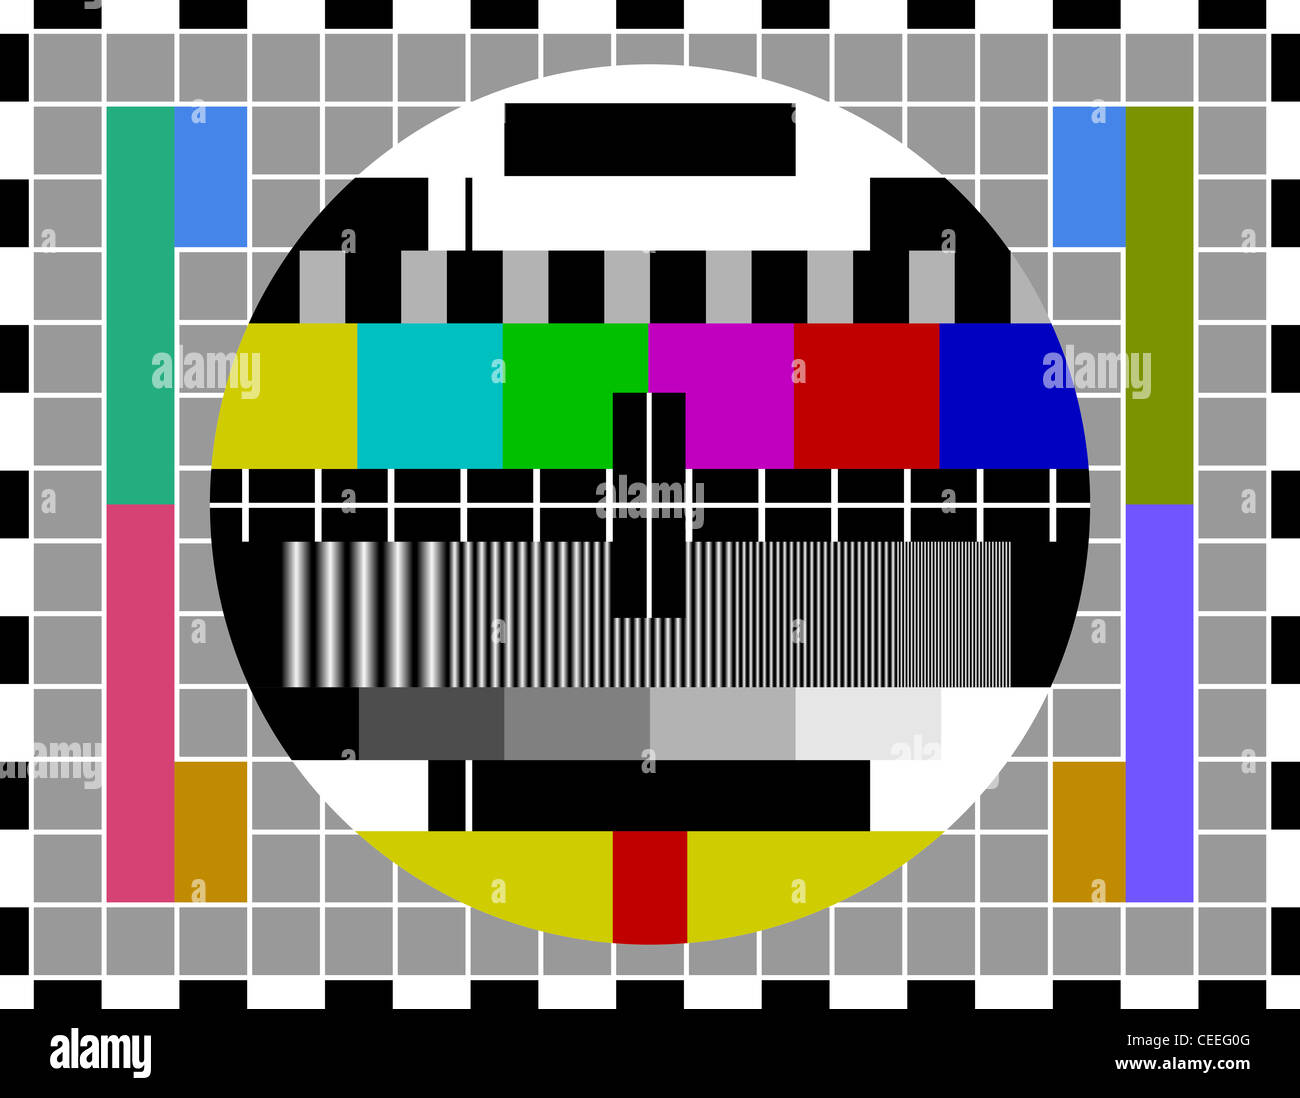 PAL TV test signal - Classic pattern for testing TV signal quality in PAL television systems Stock Photo